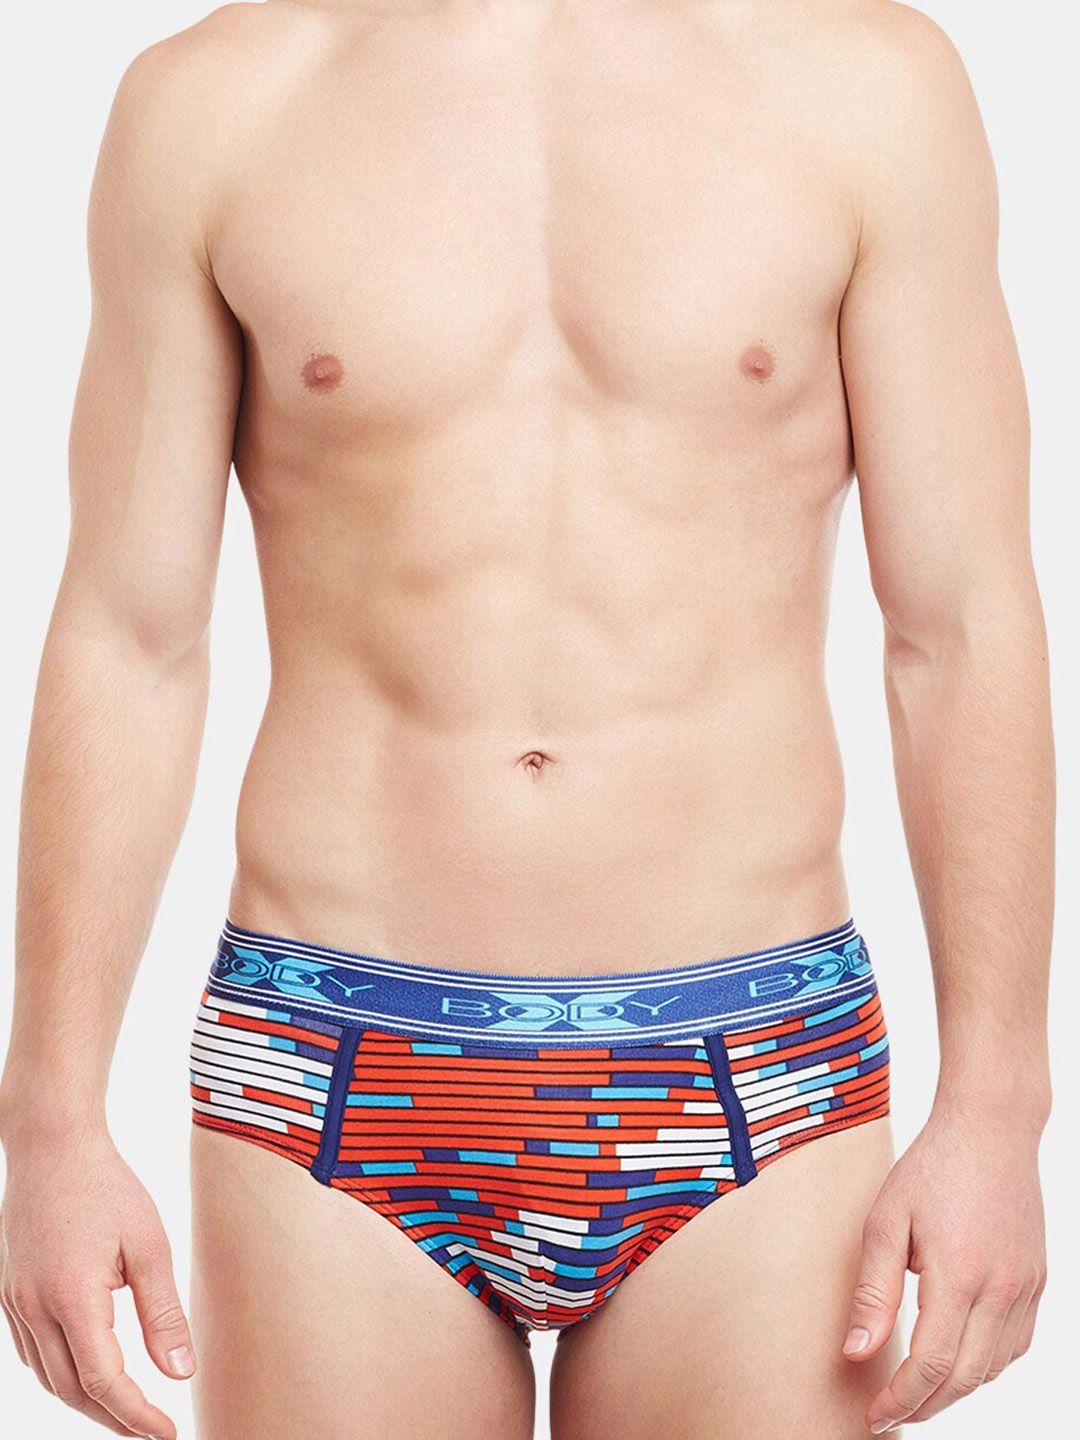 bodyx abstract printed hipster brief bx01b-print-3-s